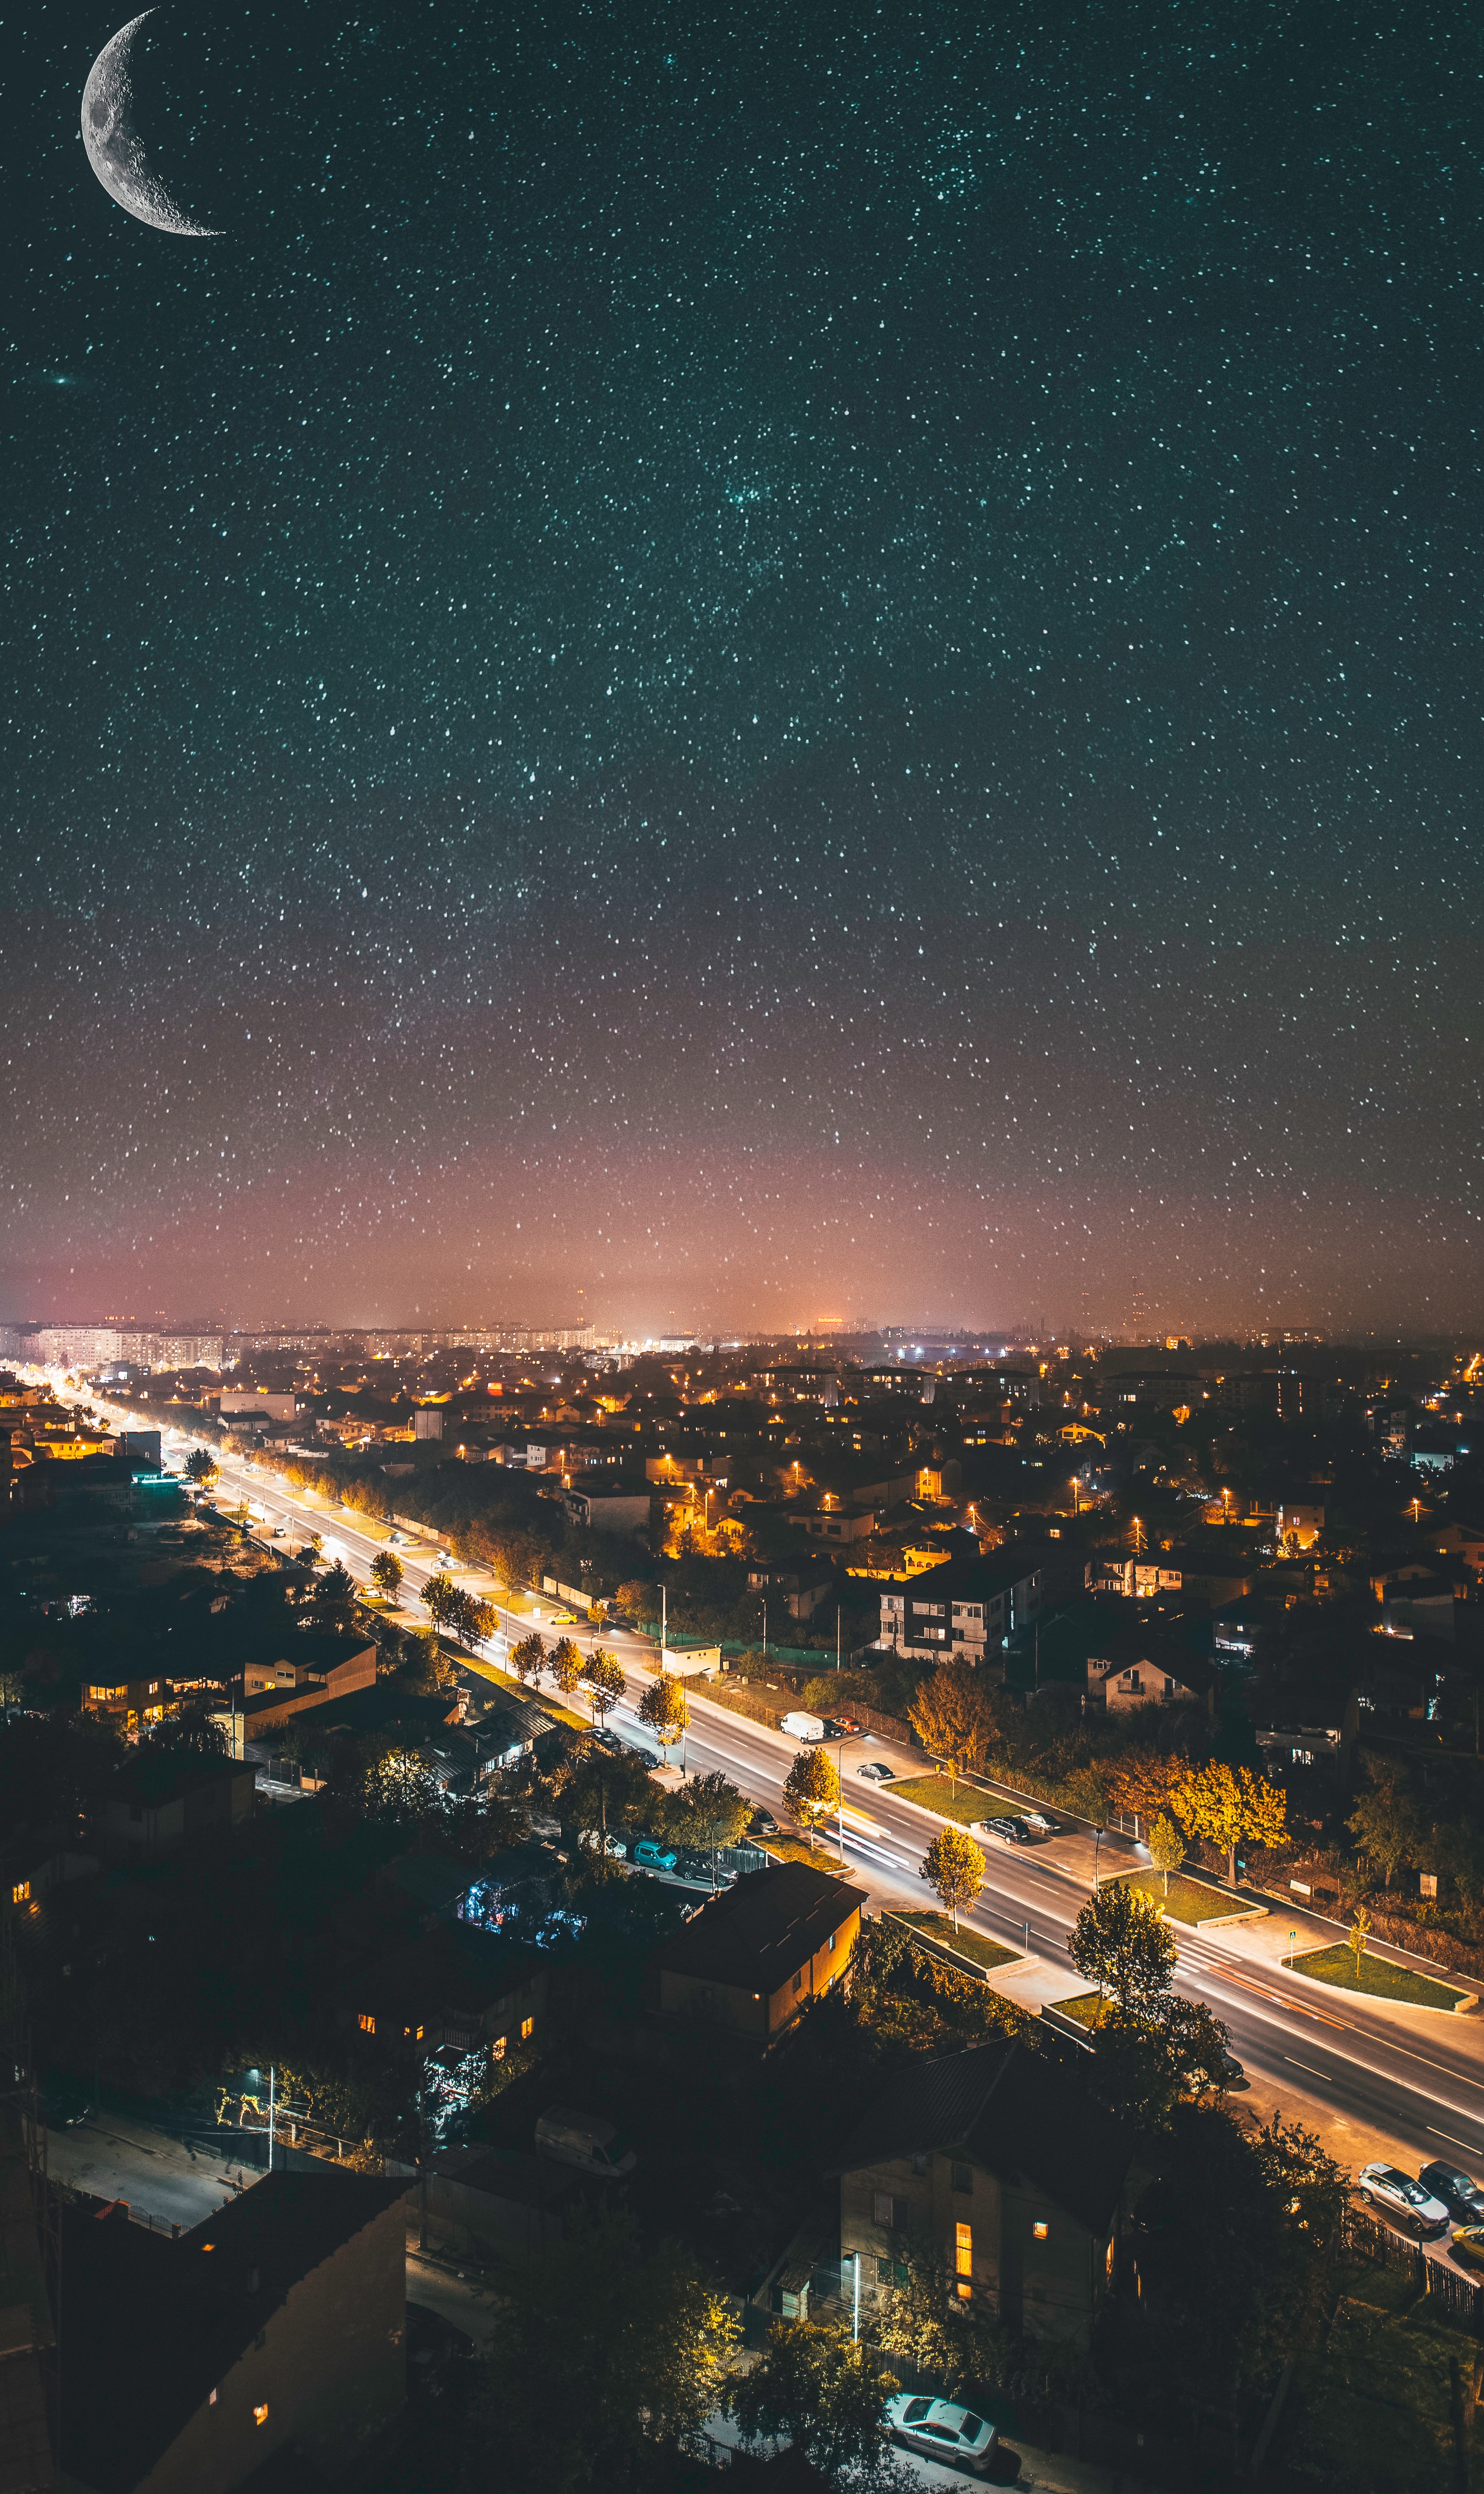 night, city, view from above, dark, starry sky, urban landscape, cityscape cellphone